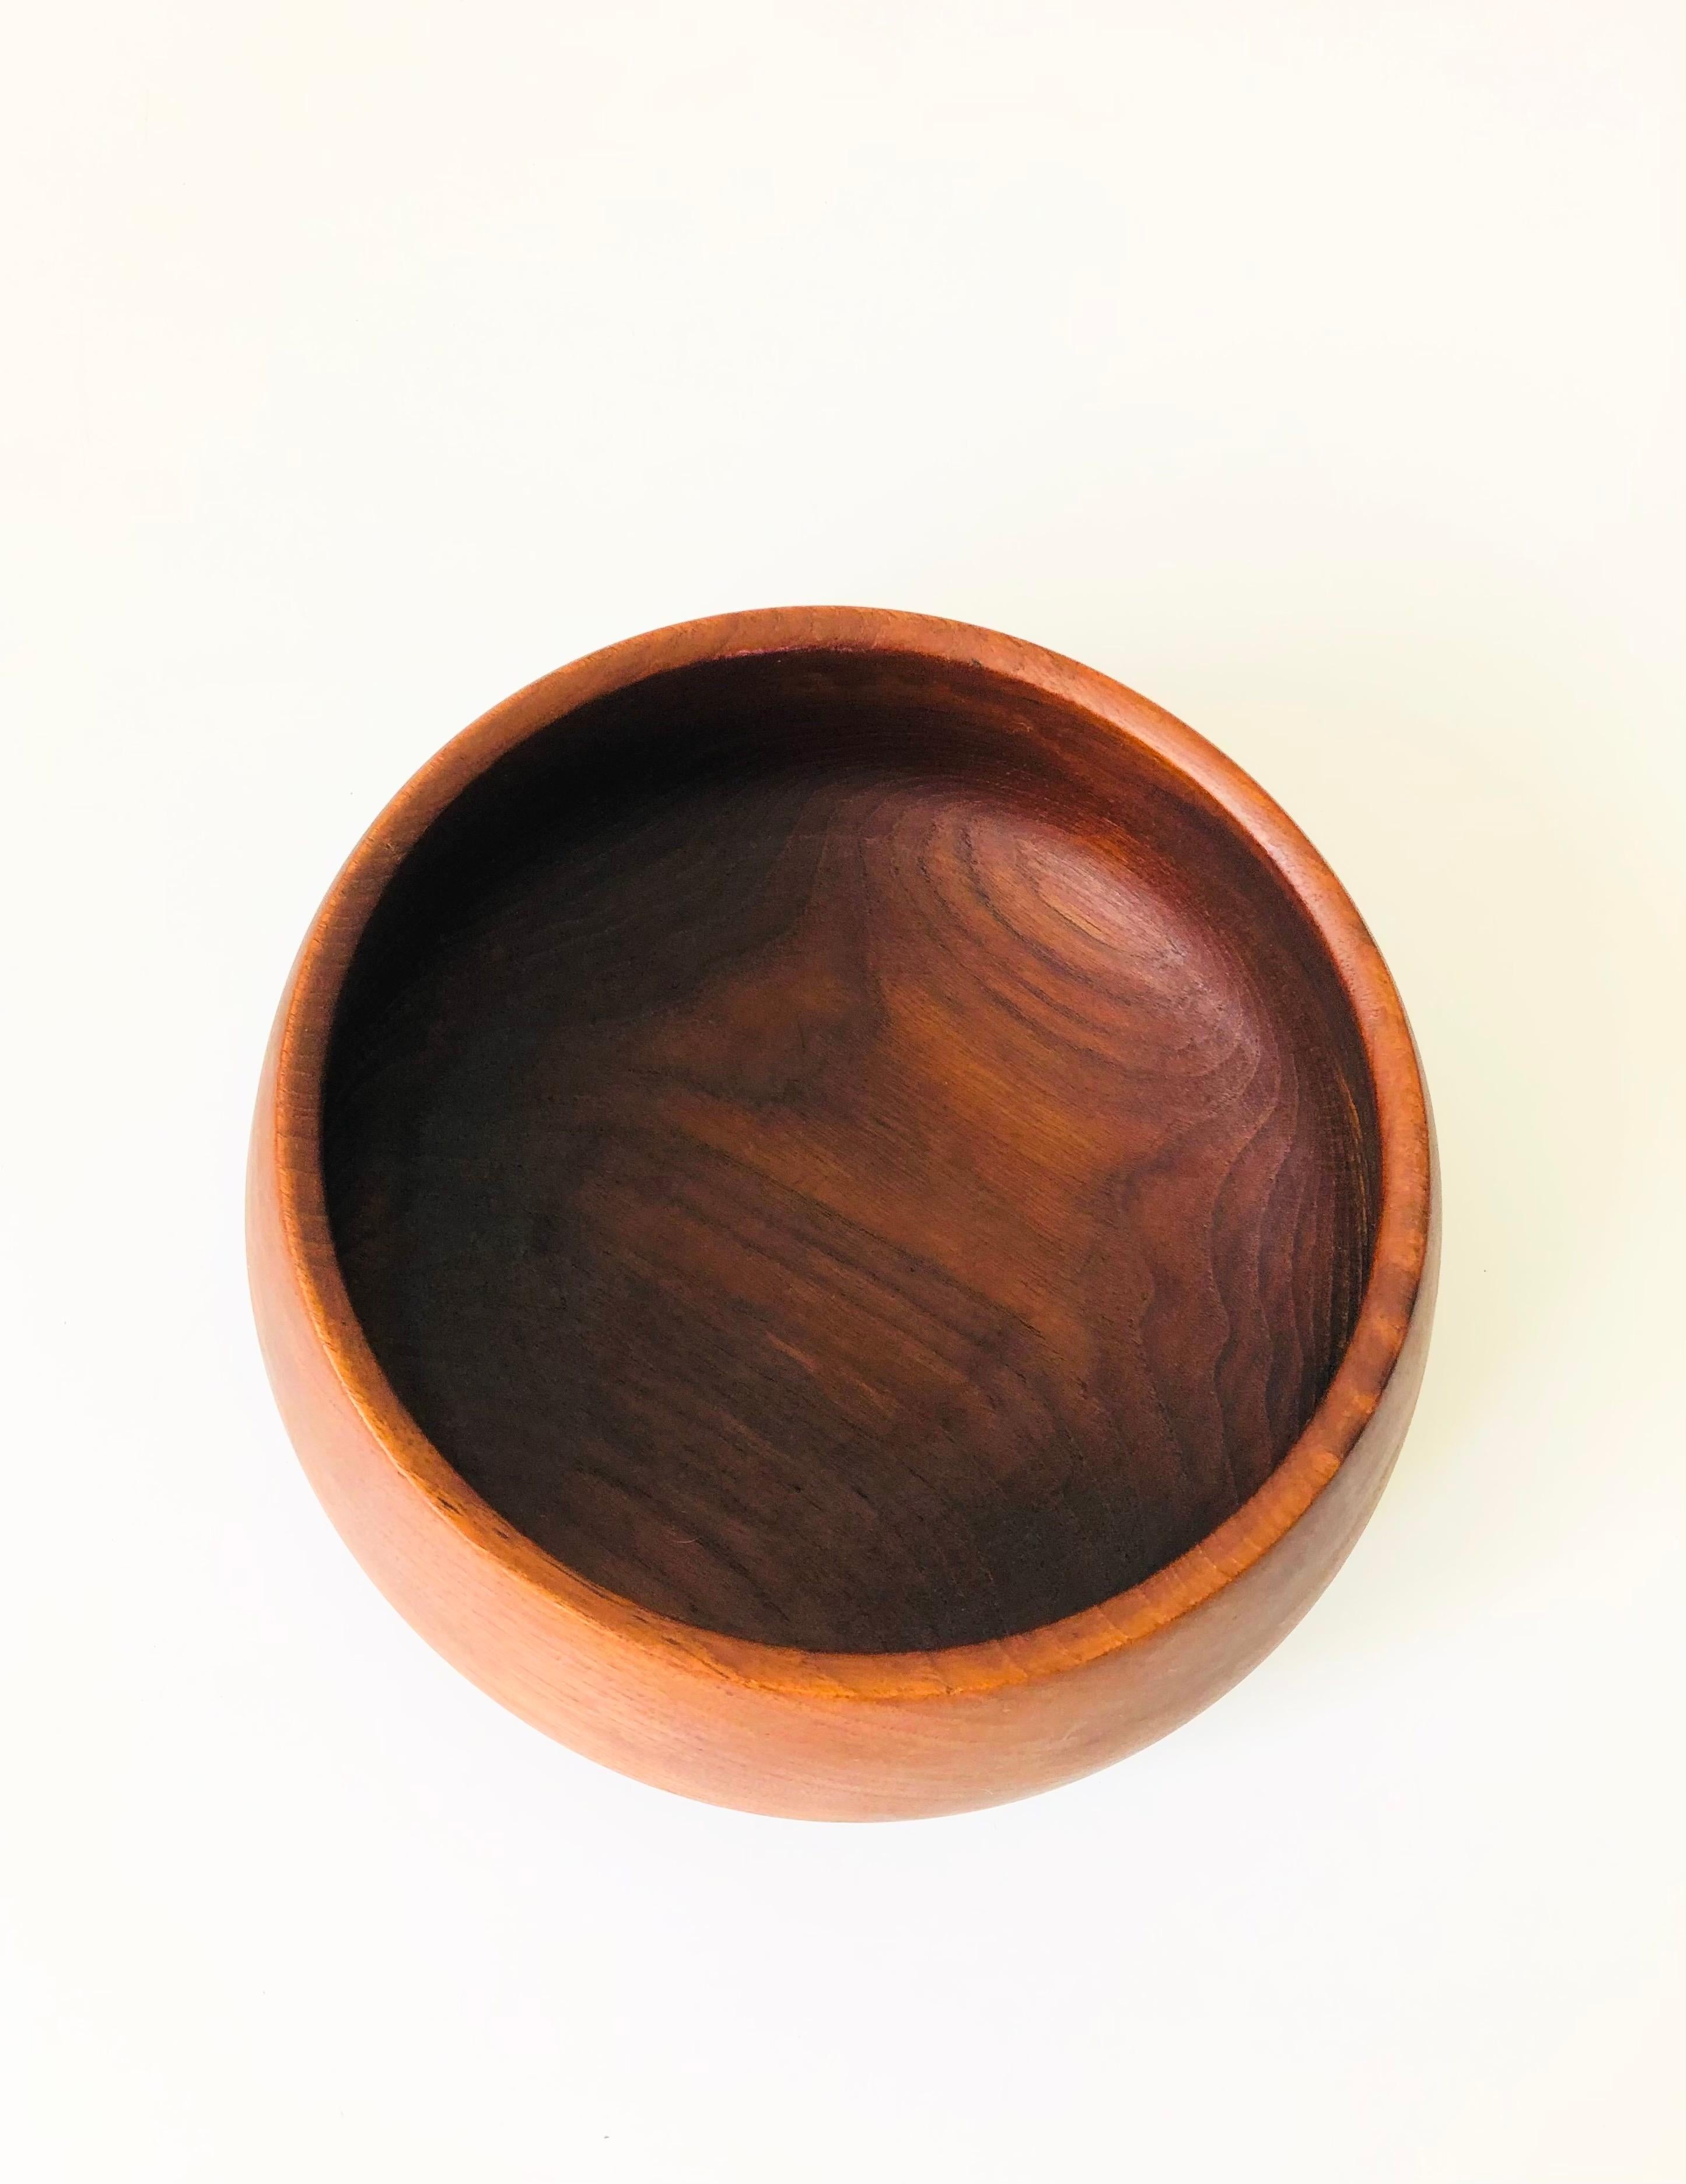 A lovely vintage teak salad bowl. Beautiful natural grain to the wood in a simple tapered shape. A wonderful and useful dining accessory for a midcentury home.

